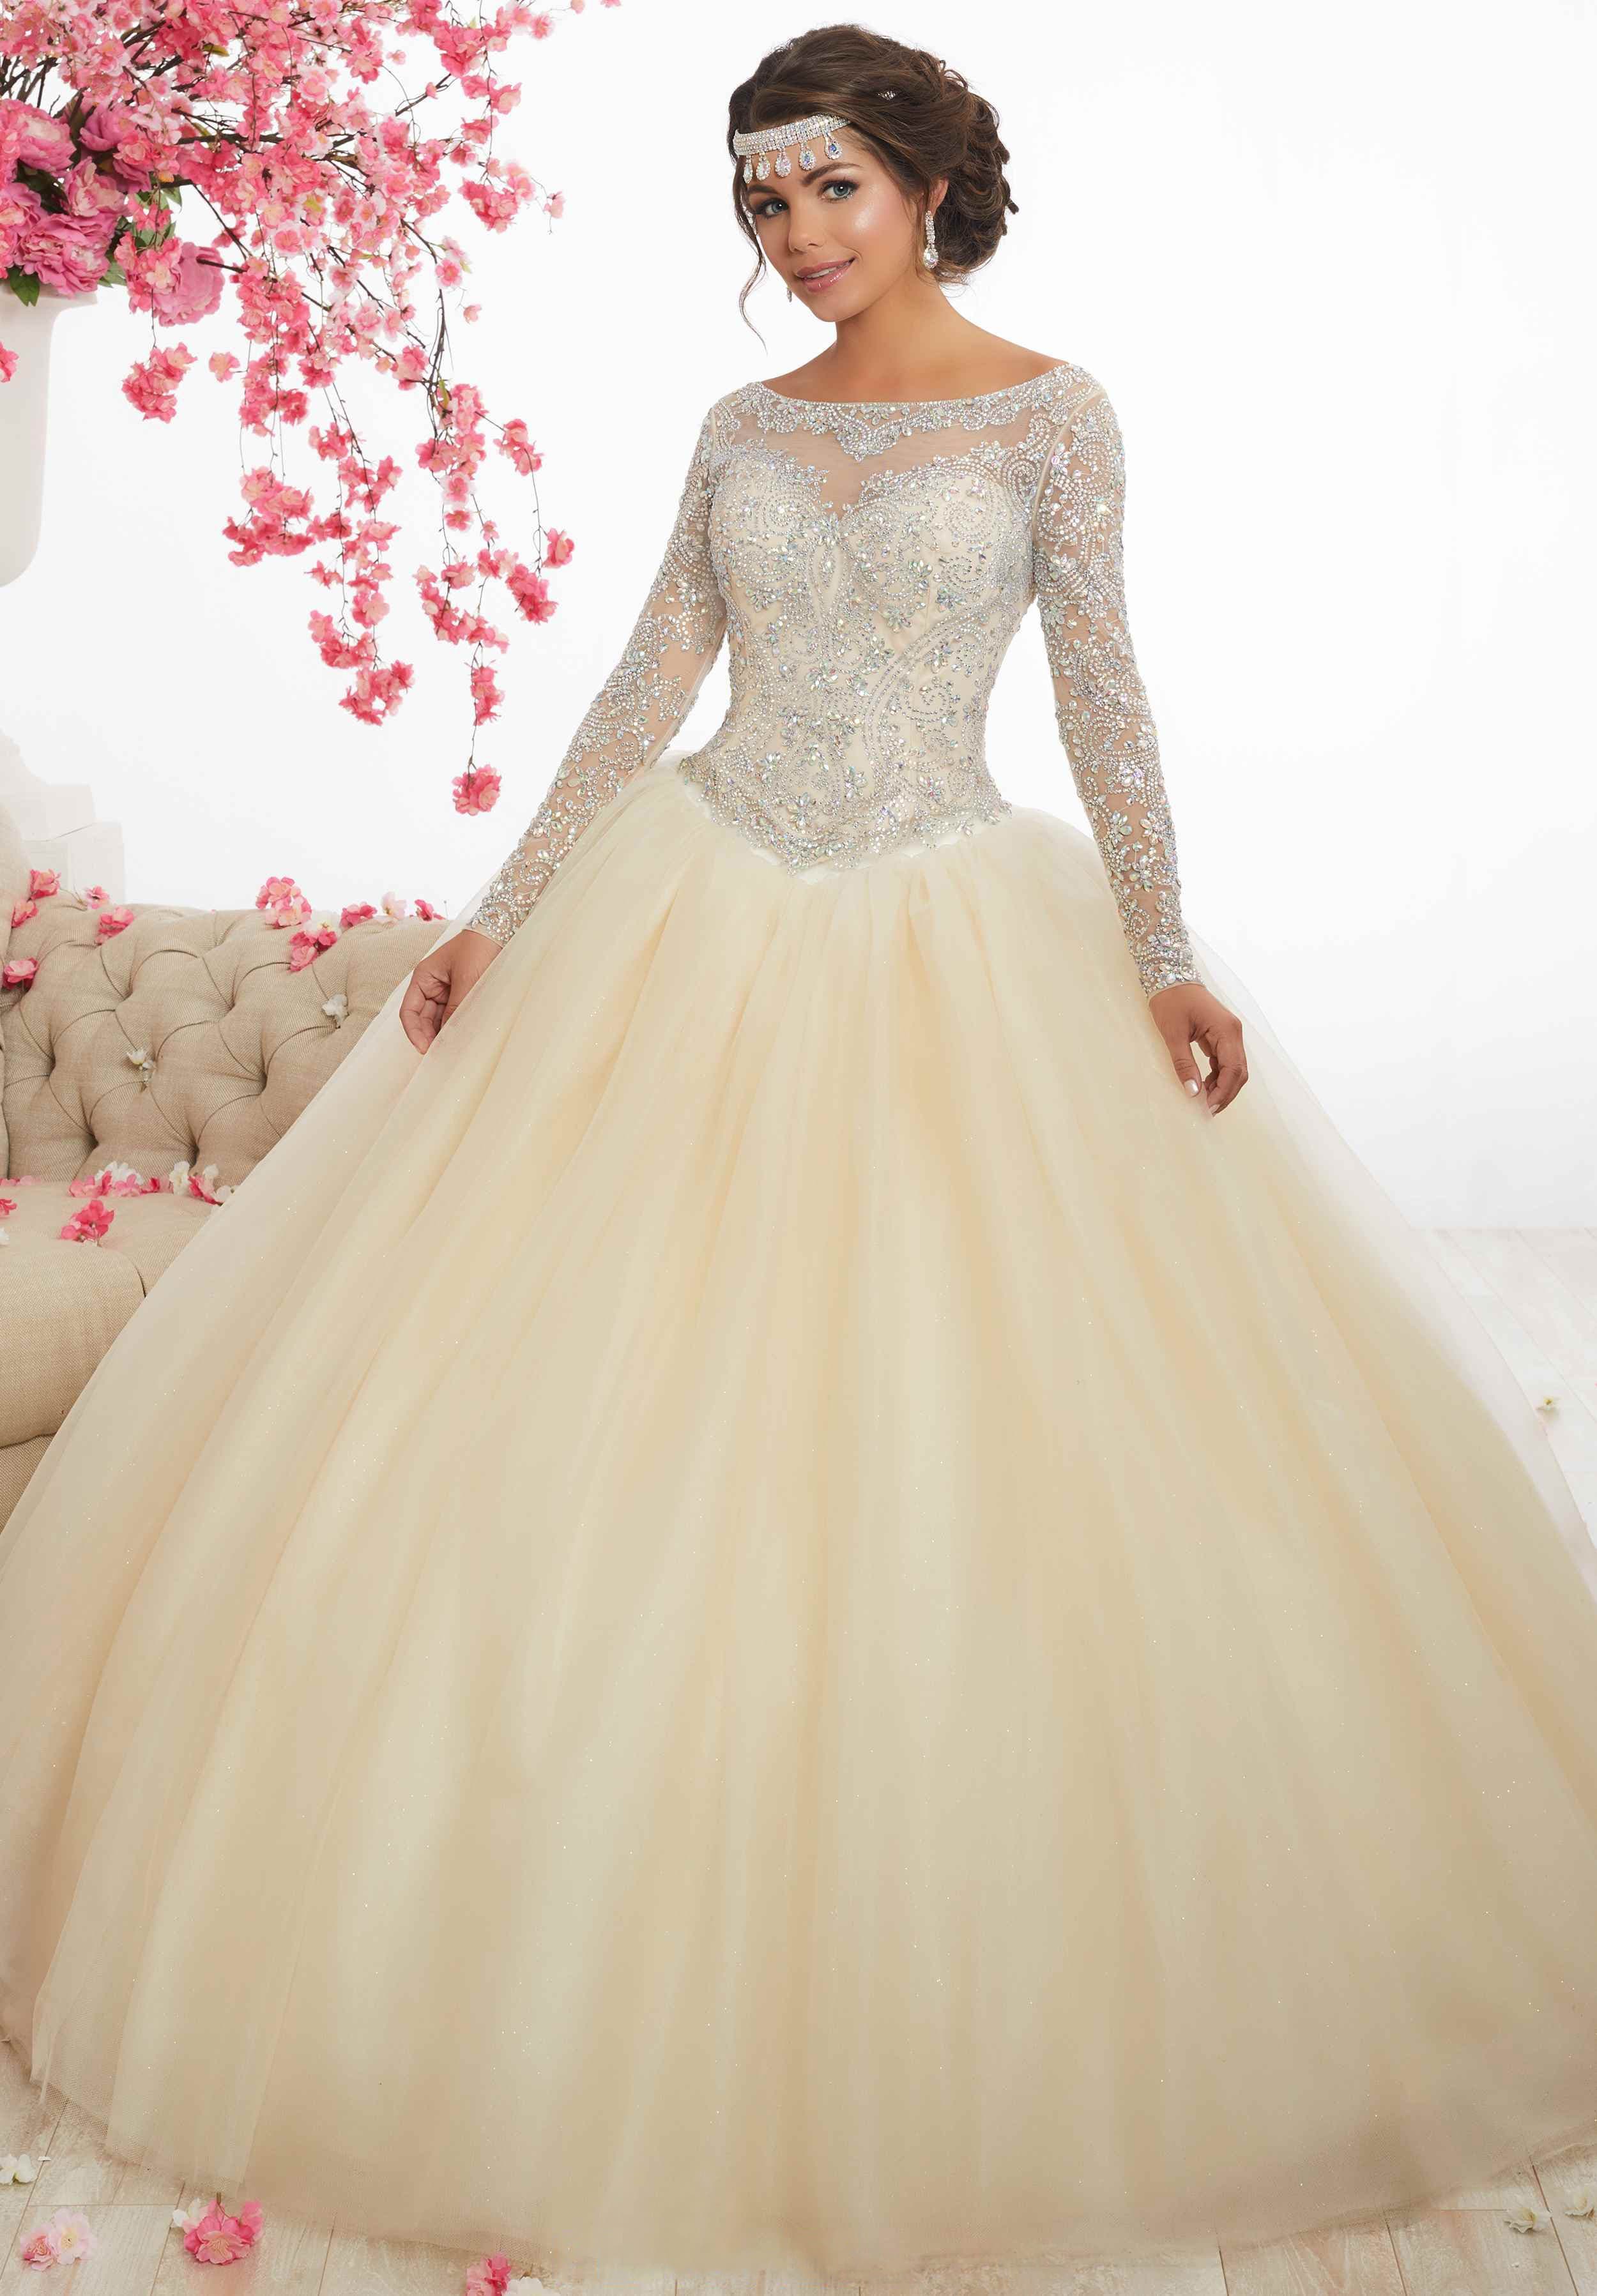 Image of Fiesta Gowns - 56347 Embellished Long Sleeve Ballgown